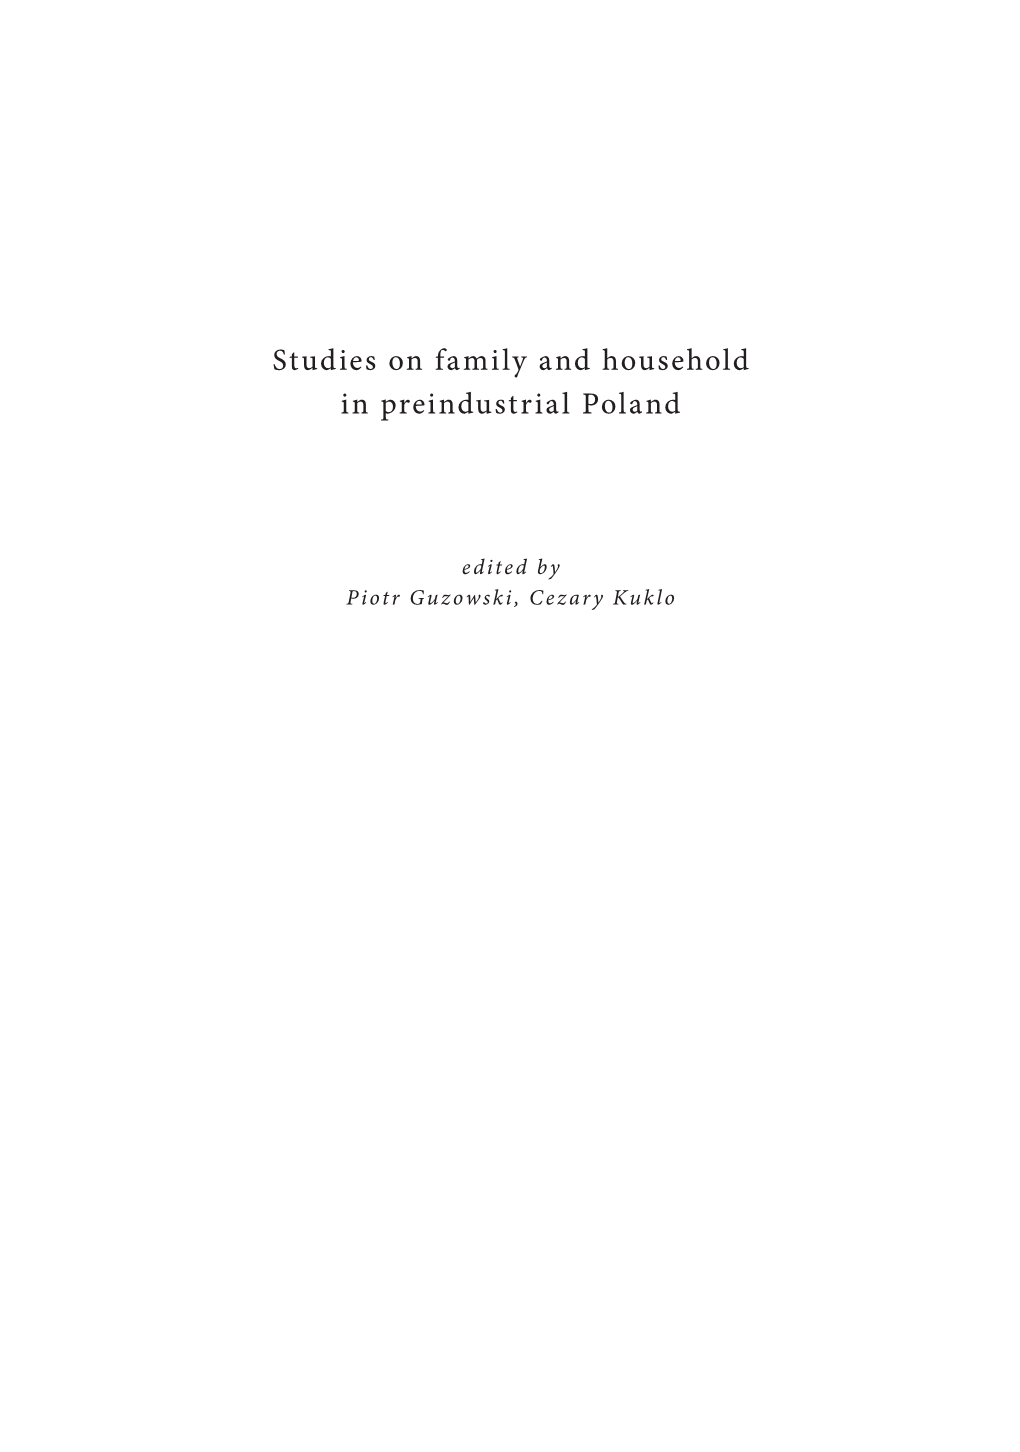 Studies on Family and Household in Preindustrial Poland